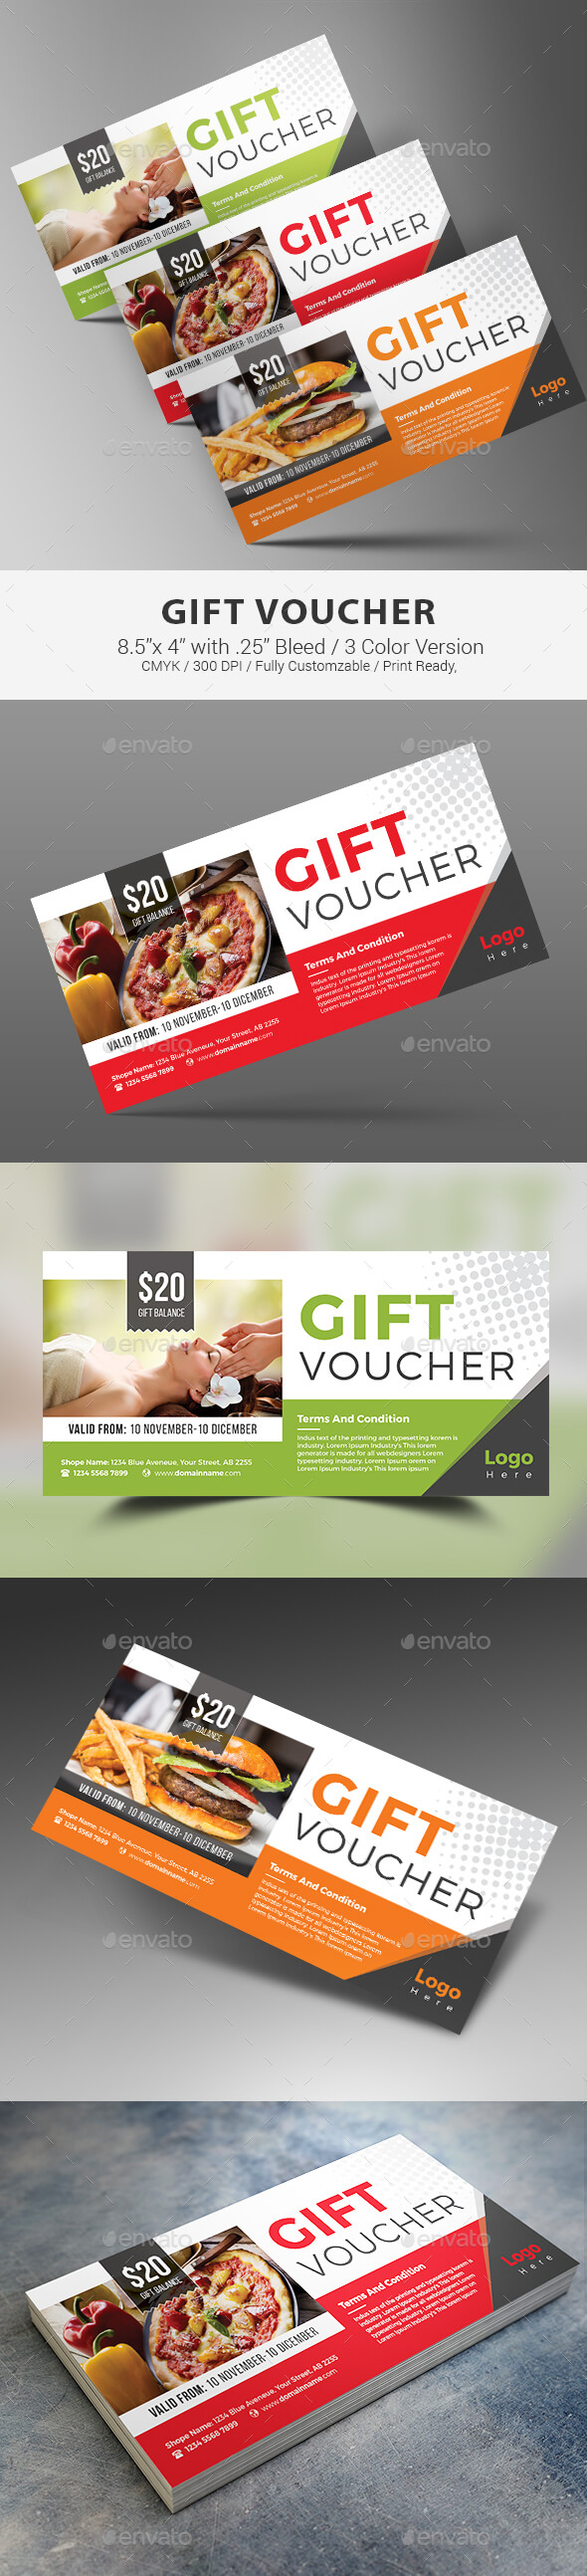 Gift Voucher Template Psd | Gift Voucher Templates | Gift Throughout Pizza Gift Certificate Template